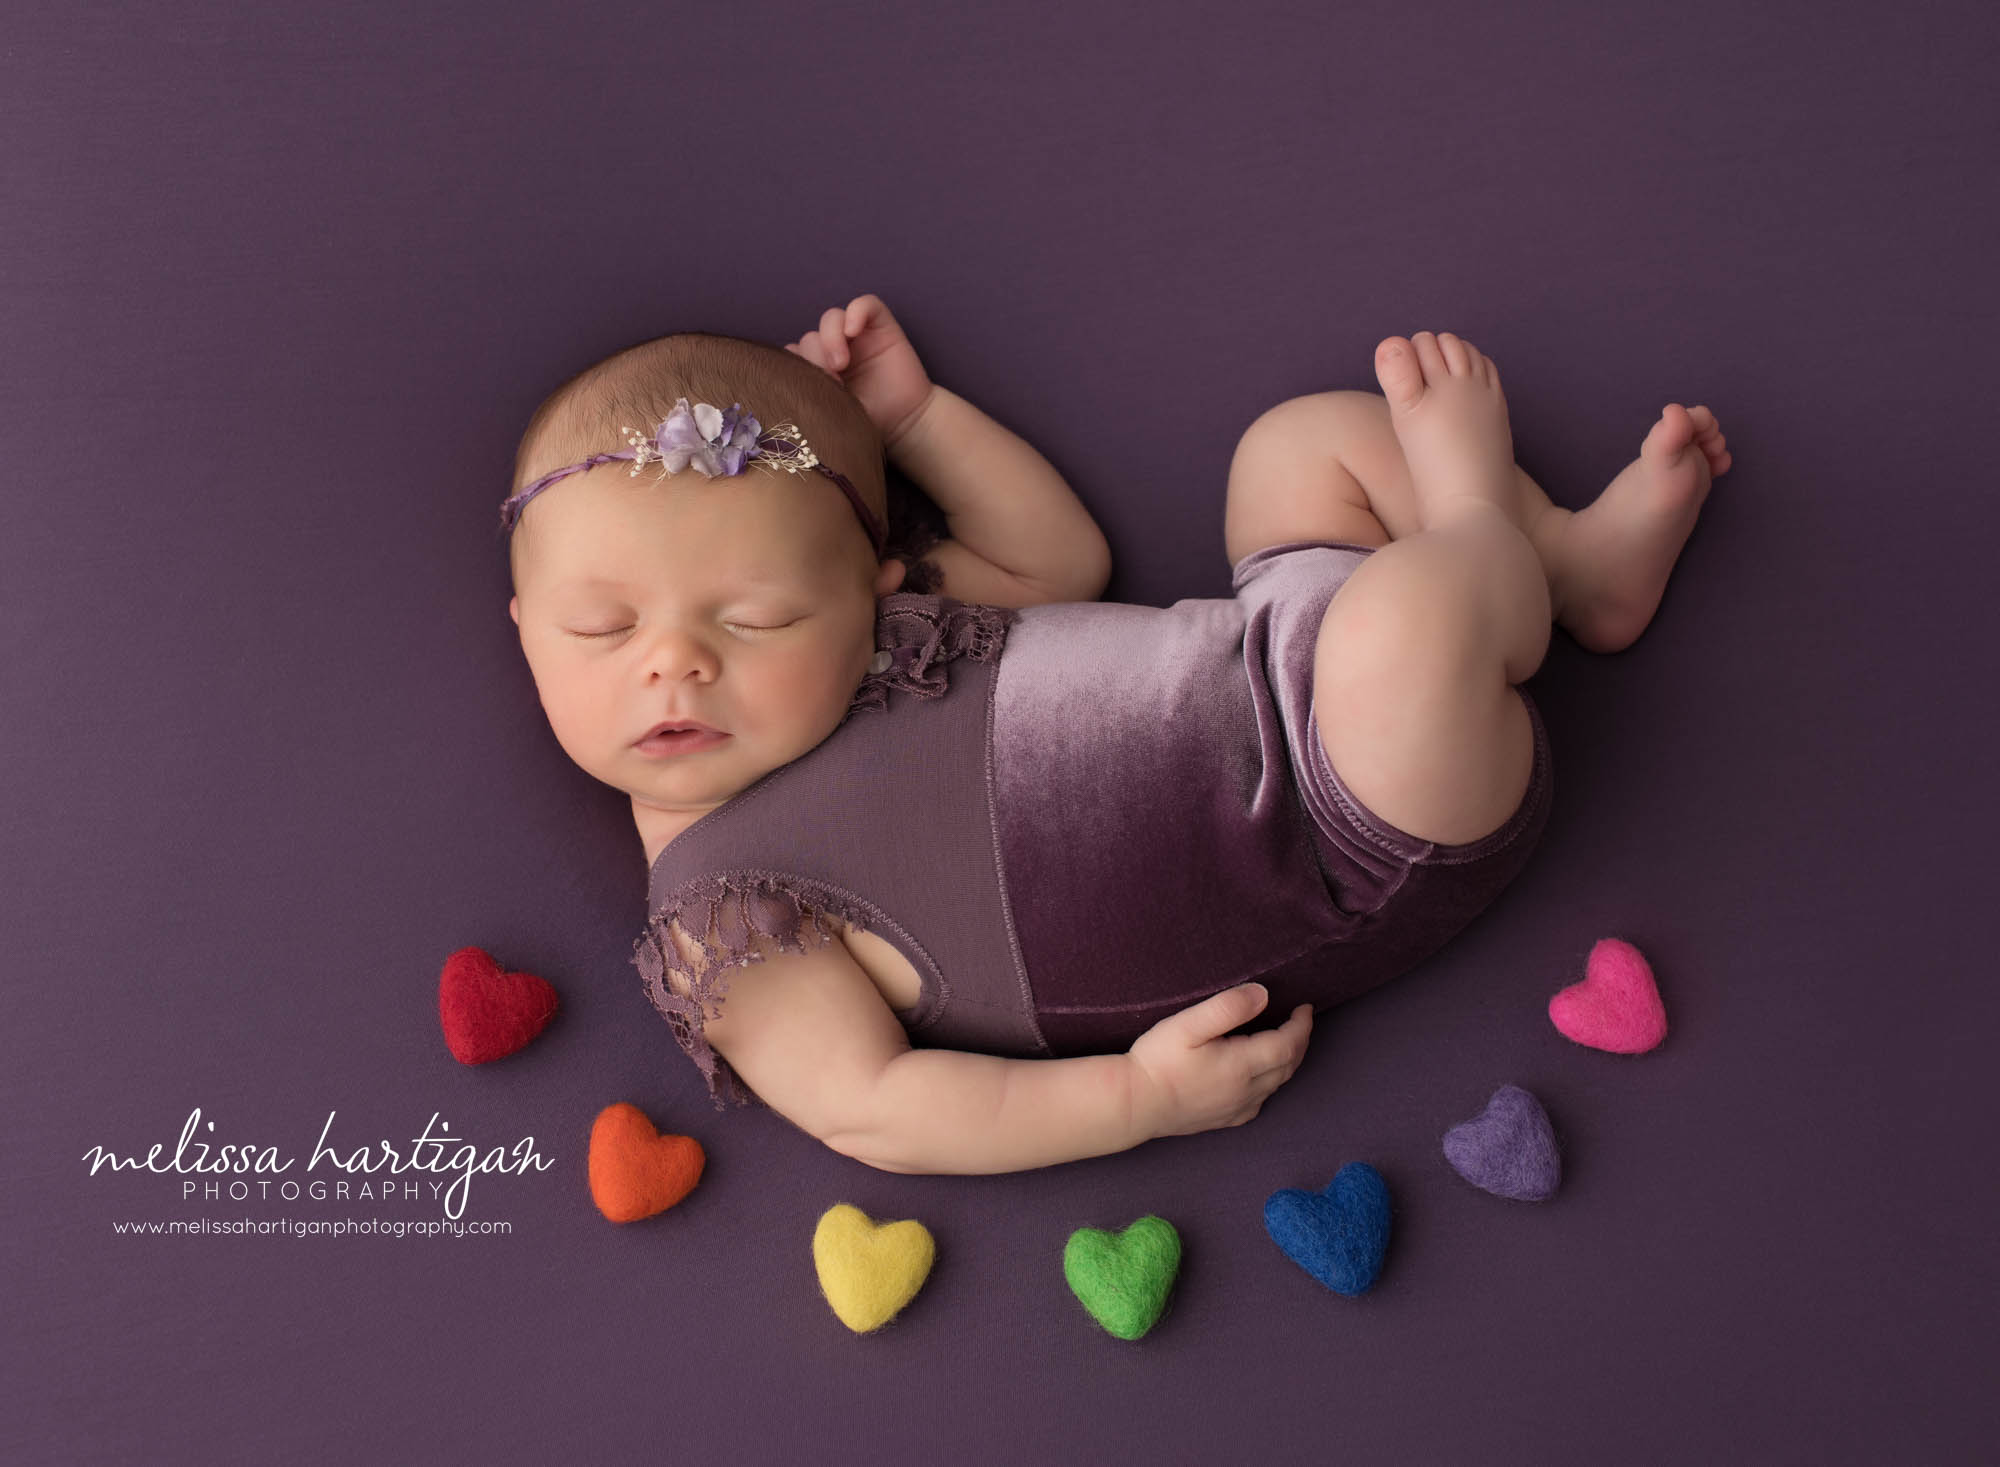 newborn baby girl posed on purple backdrop wearing purple outfit and rainbow felted hearts